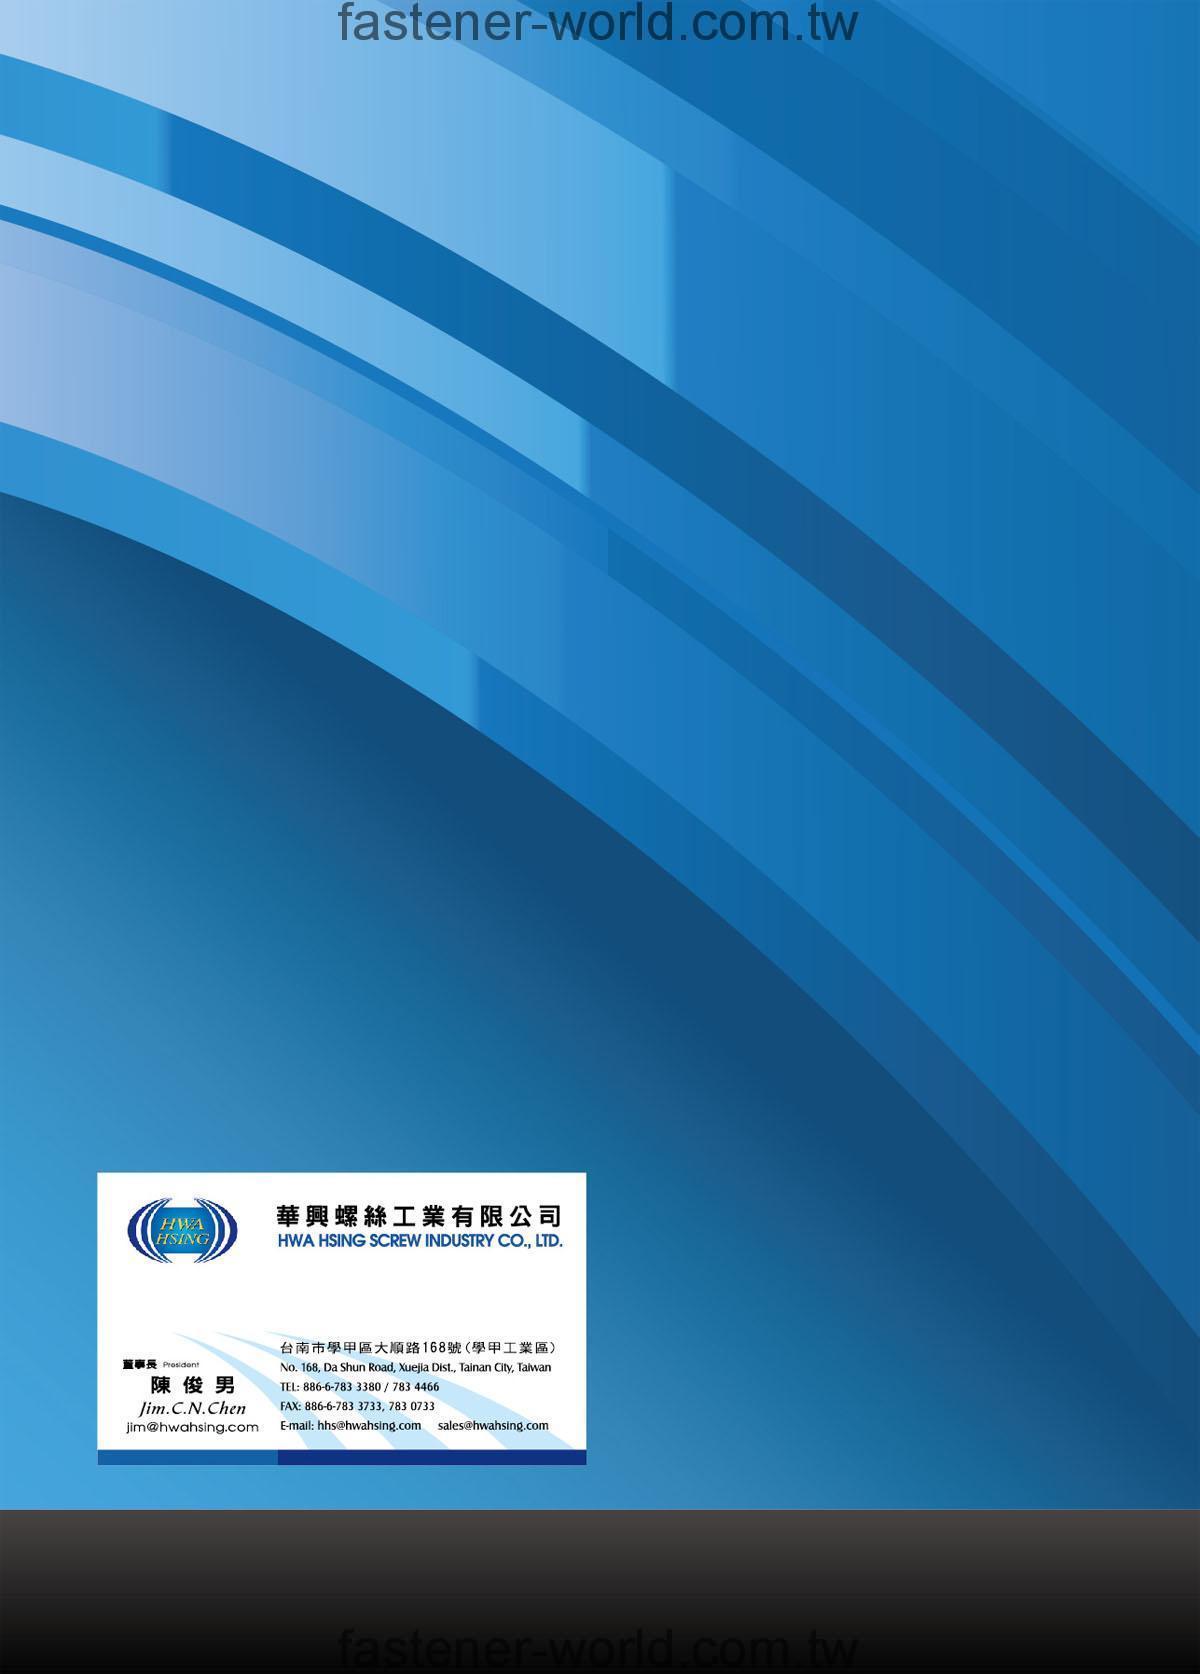 HWA HSING SCREW INDUSTRY CO., LTD.  Online Catalogues